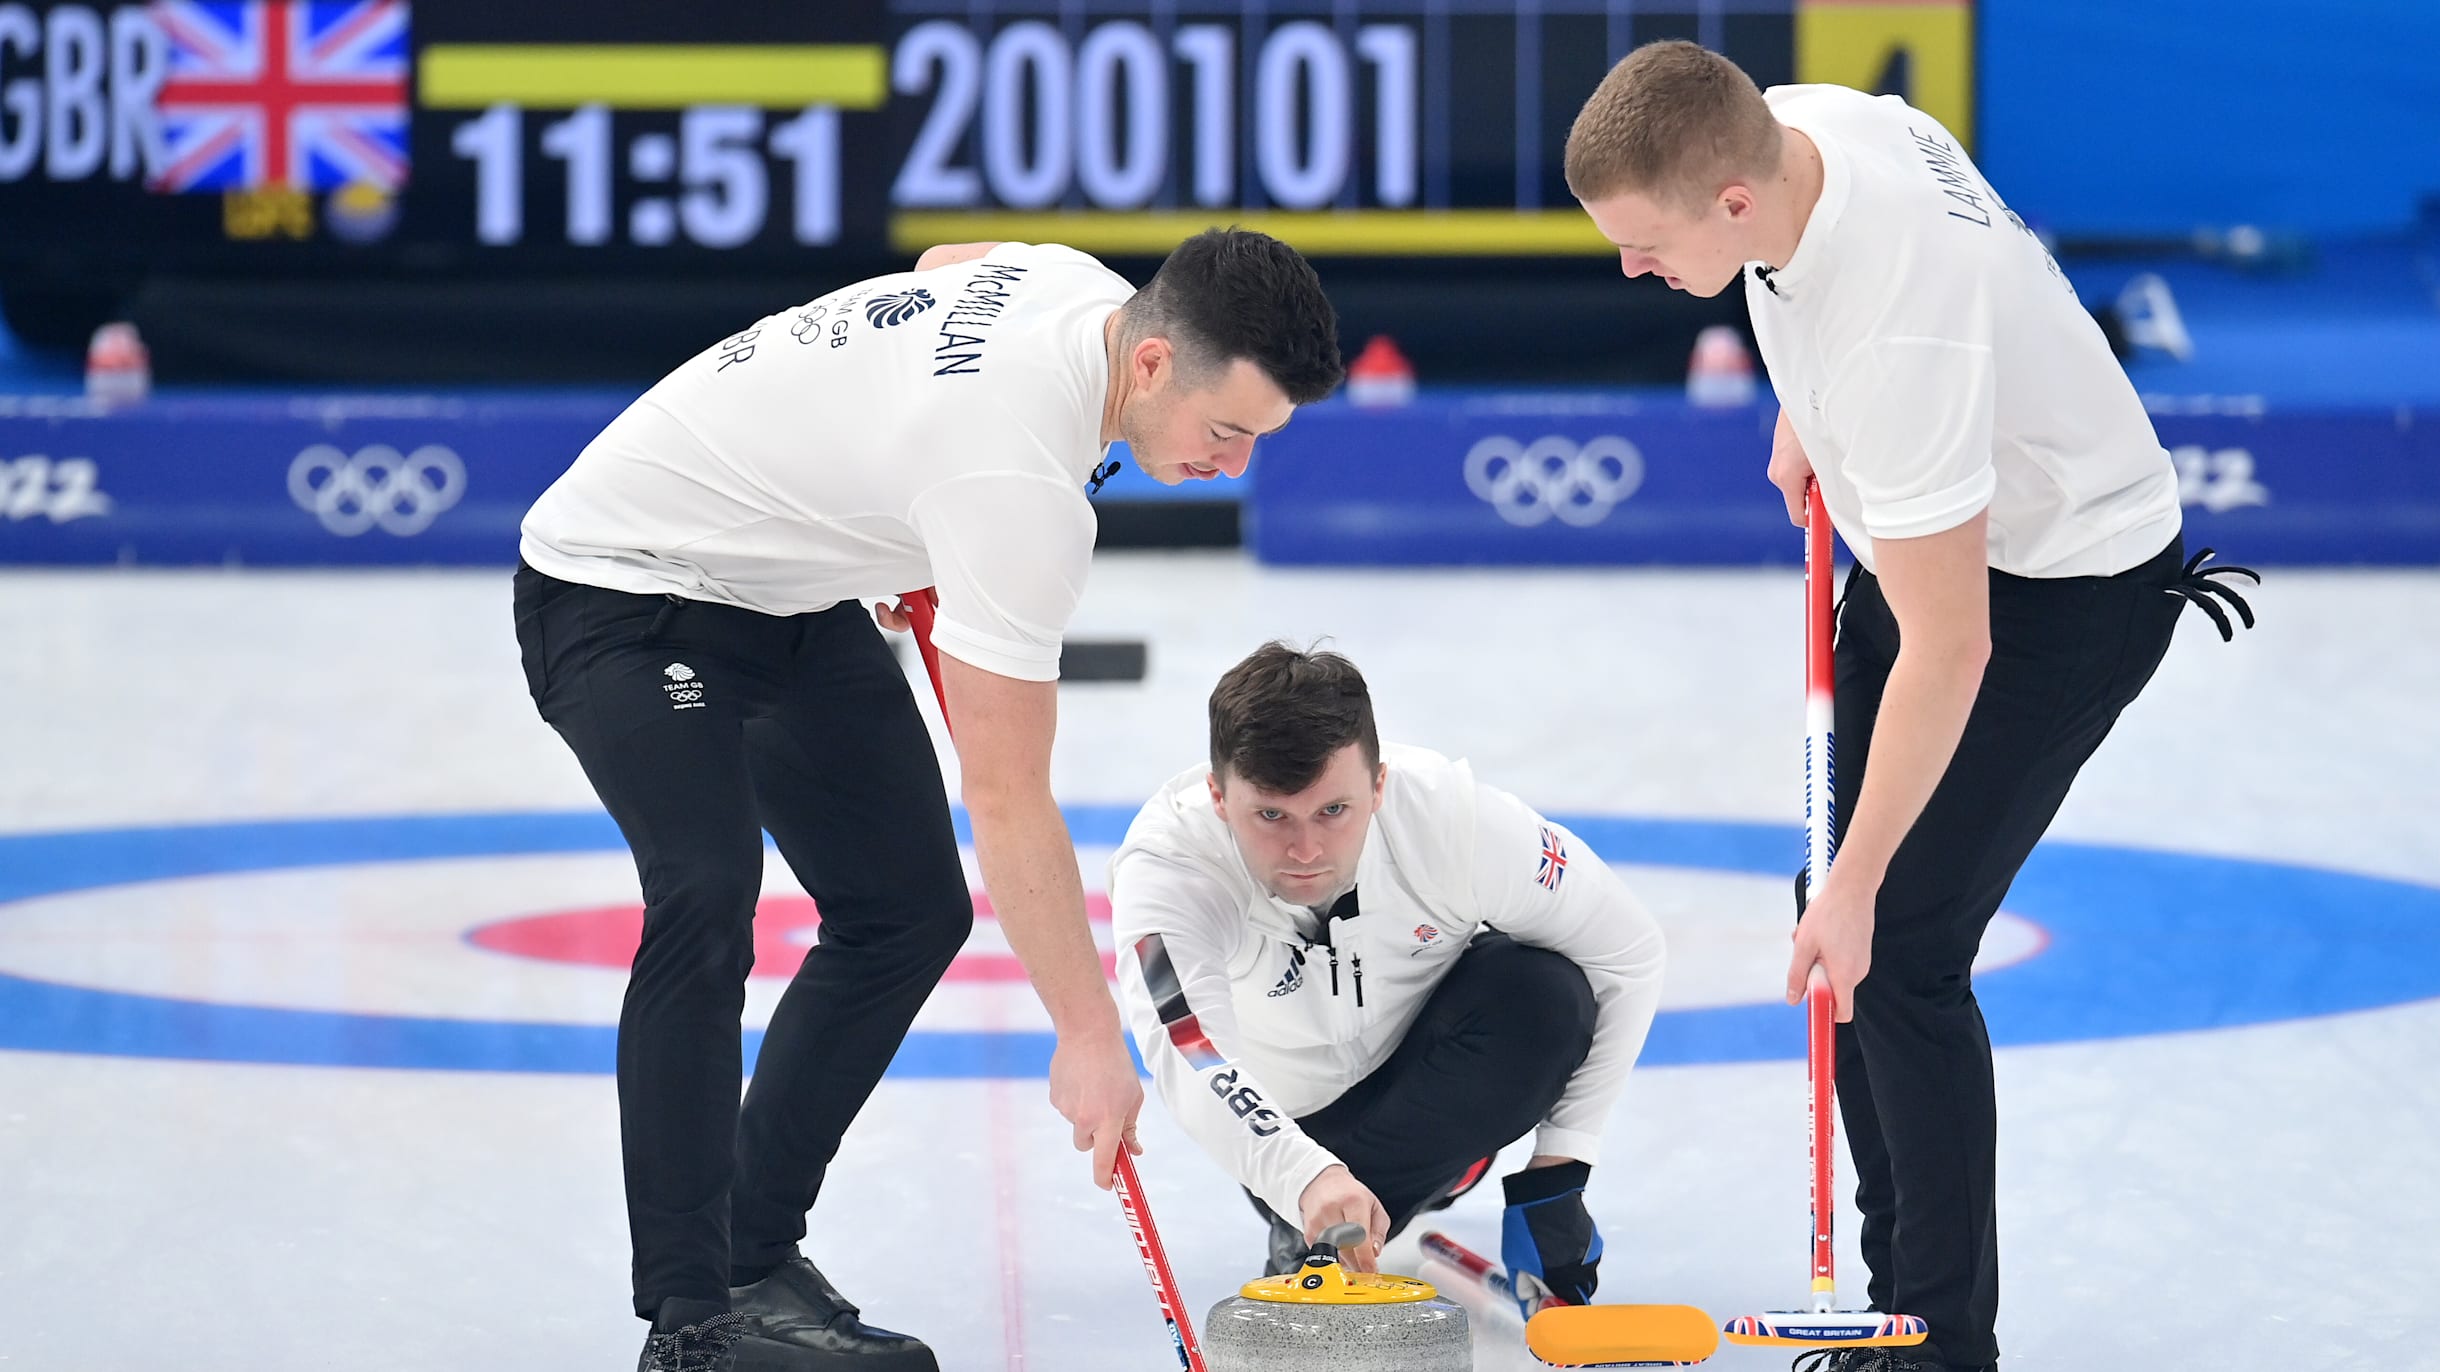 2022 European Curling Championships Schedule, how to watch live stream and stars in action